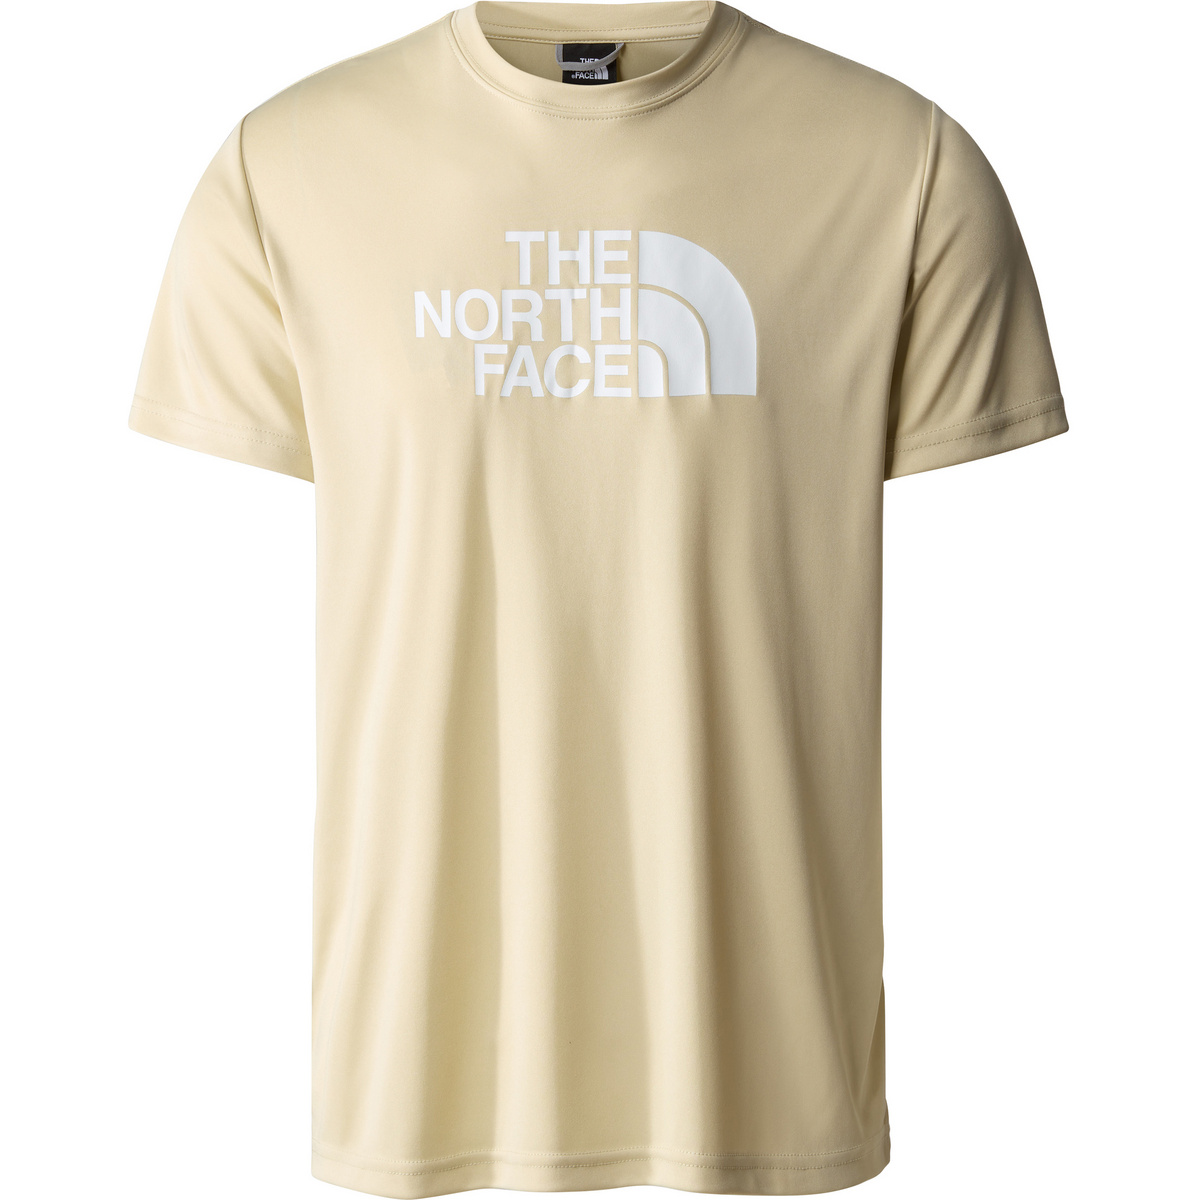 The North Face Herren Reaxion Easy T-Shirt von The North Face